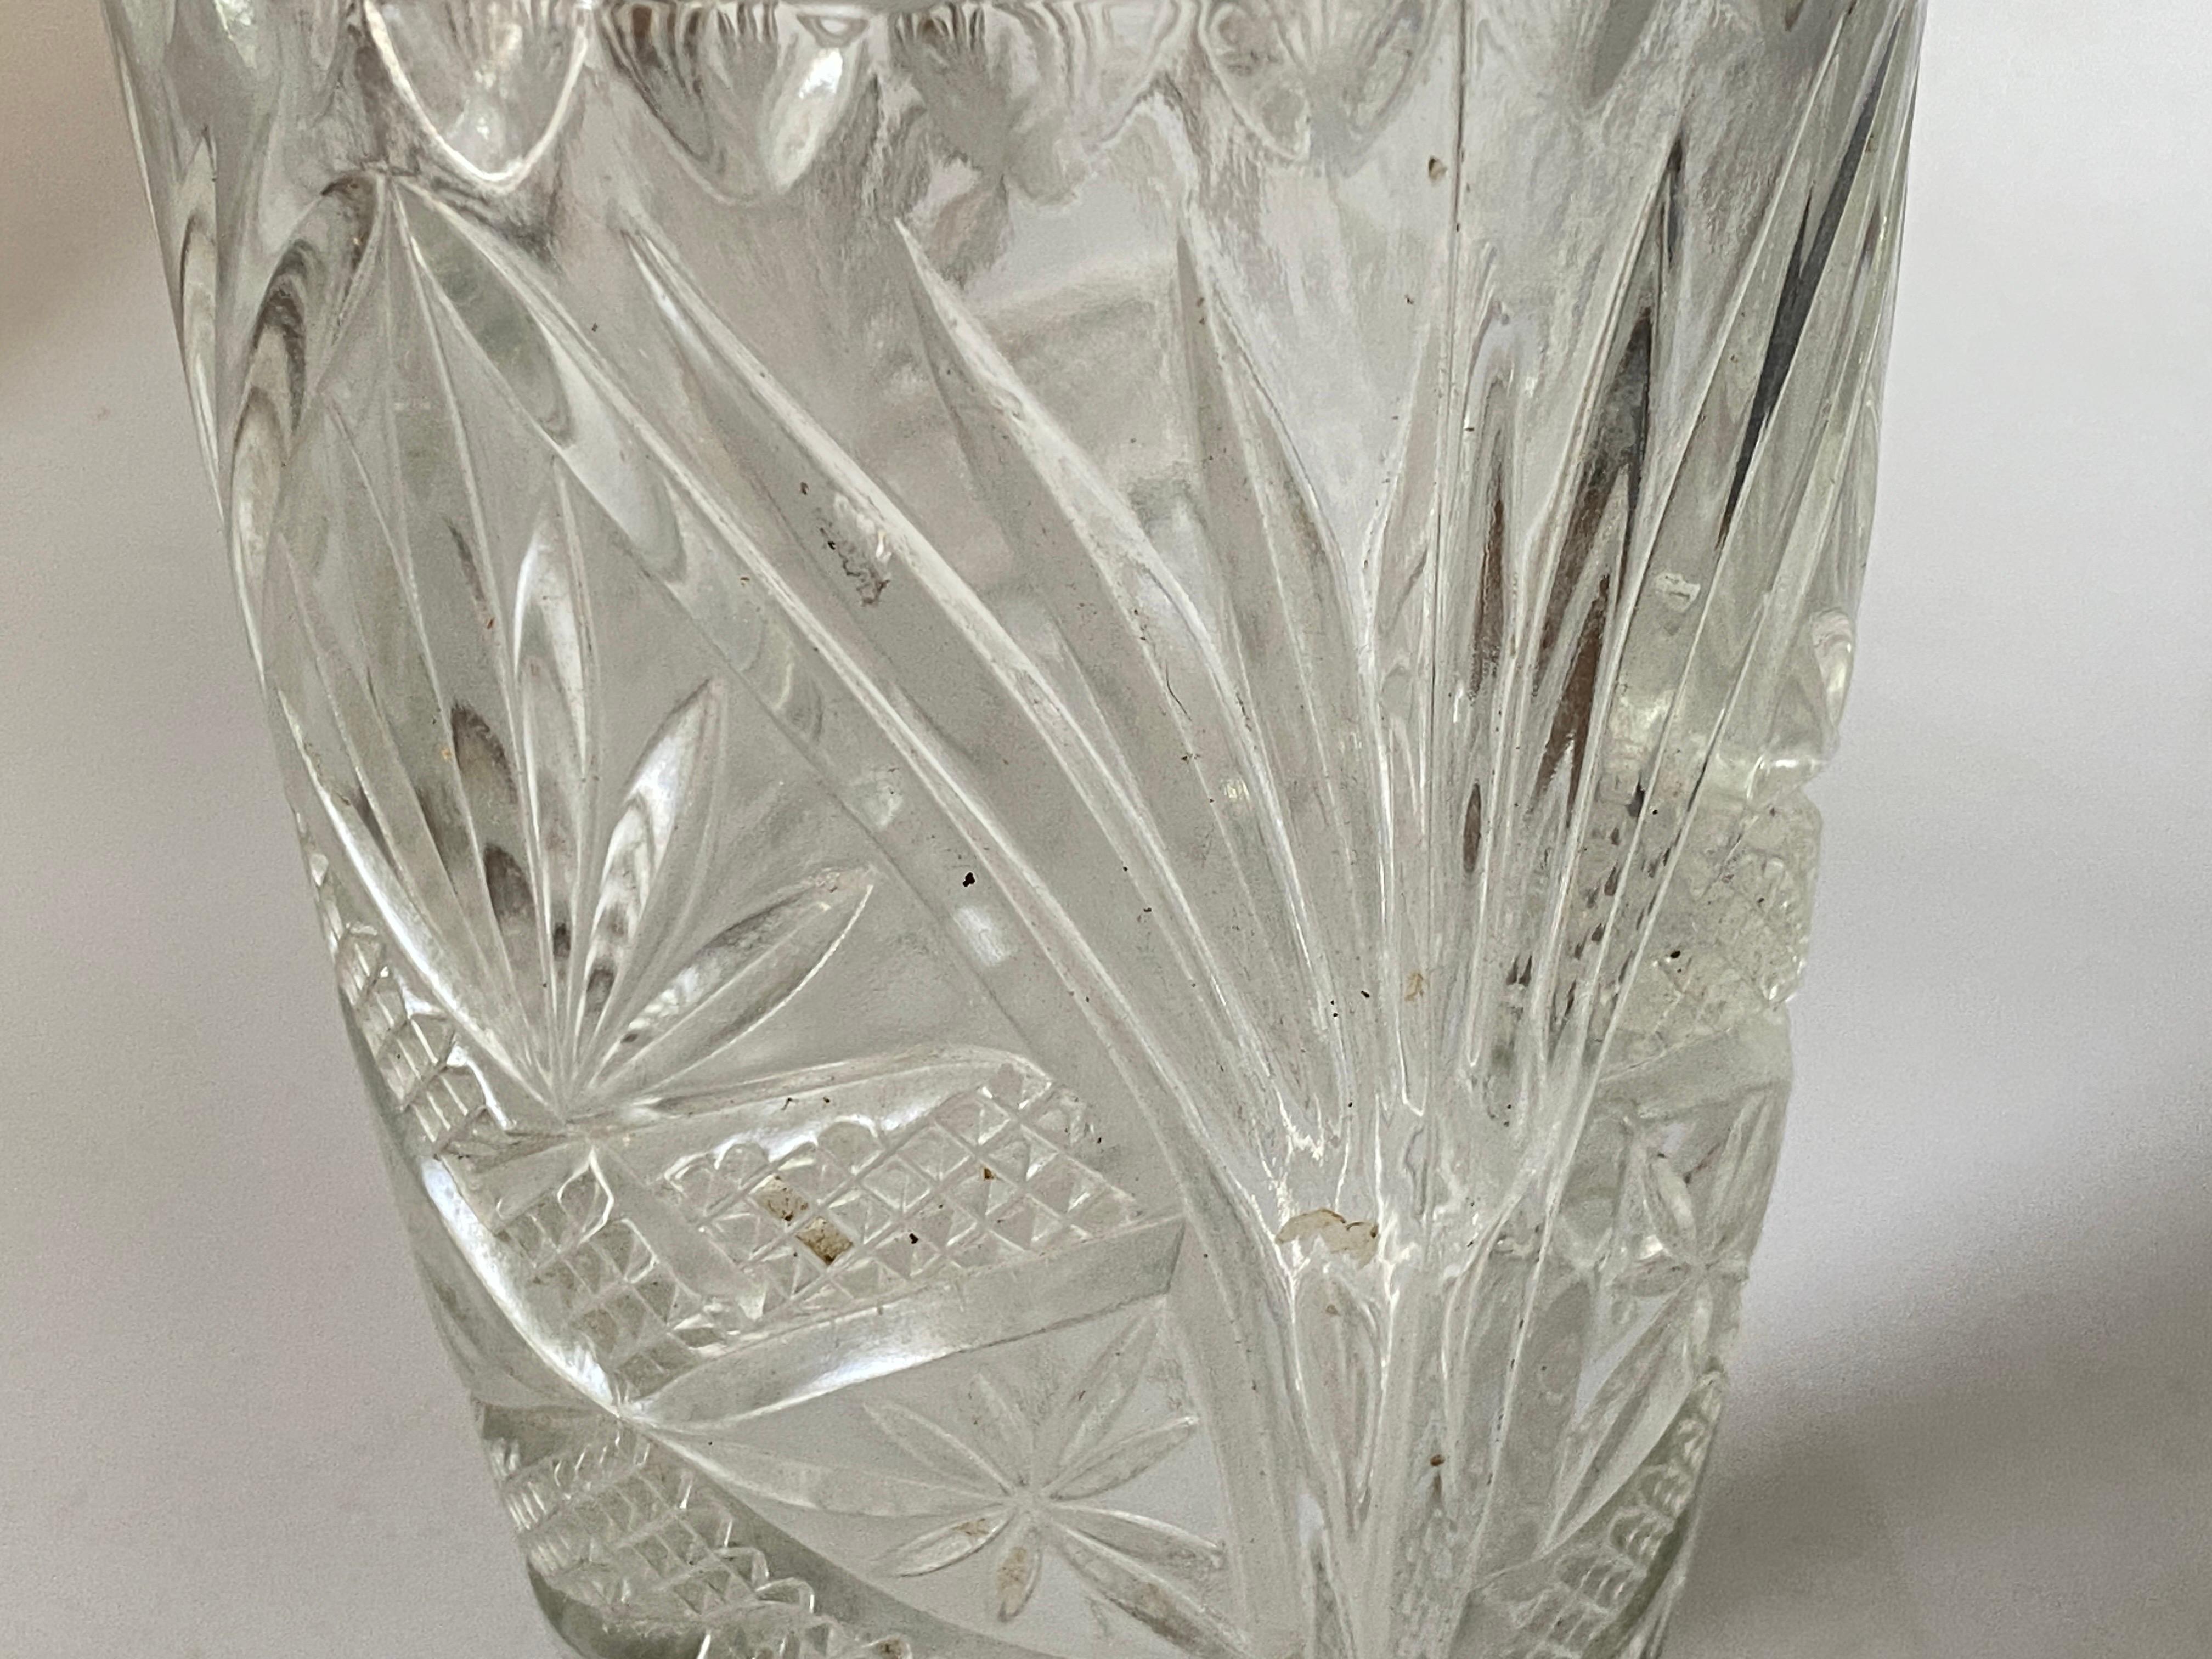 Mid-20th Century Vase, Champain Cooler in Glass, Art Deco Style, White Color, France, 1940 For Sale